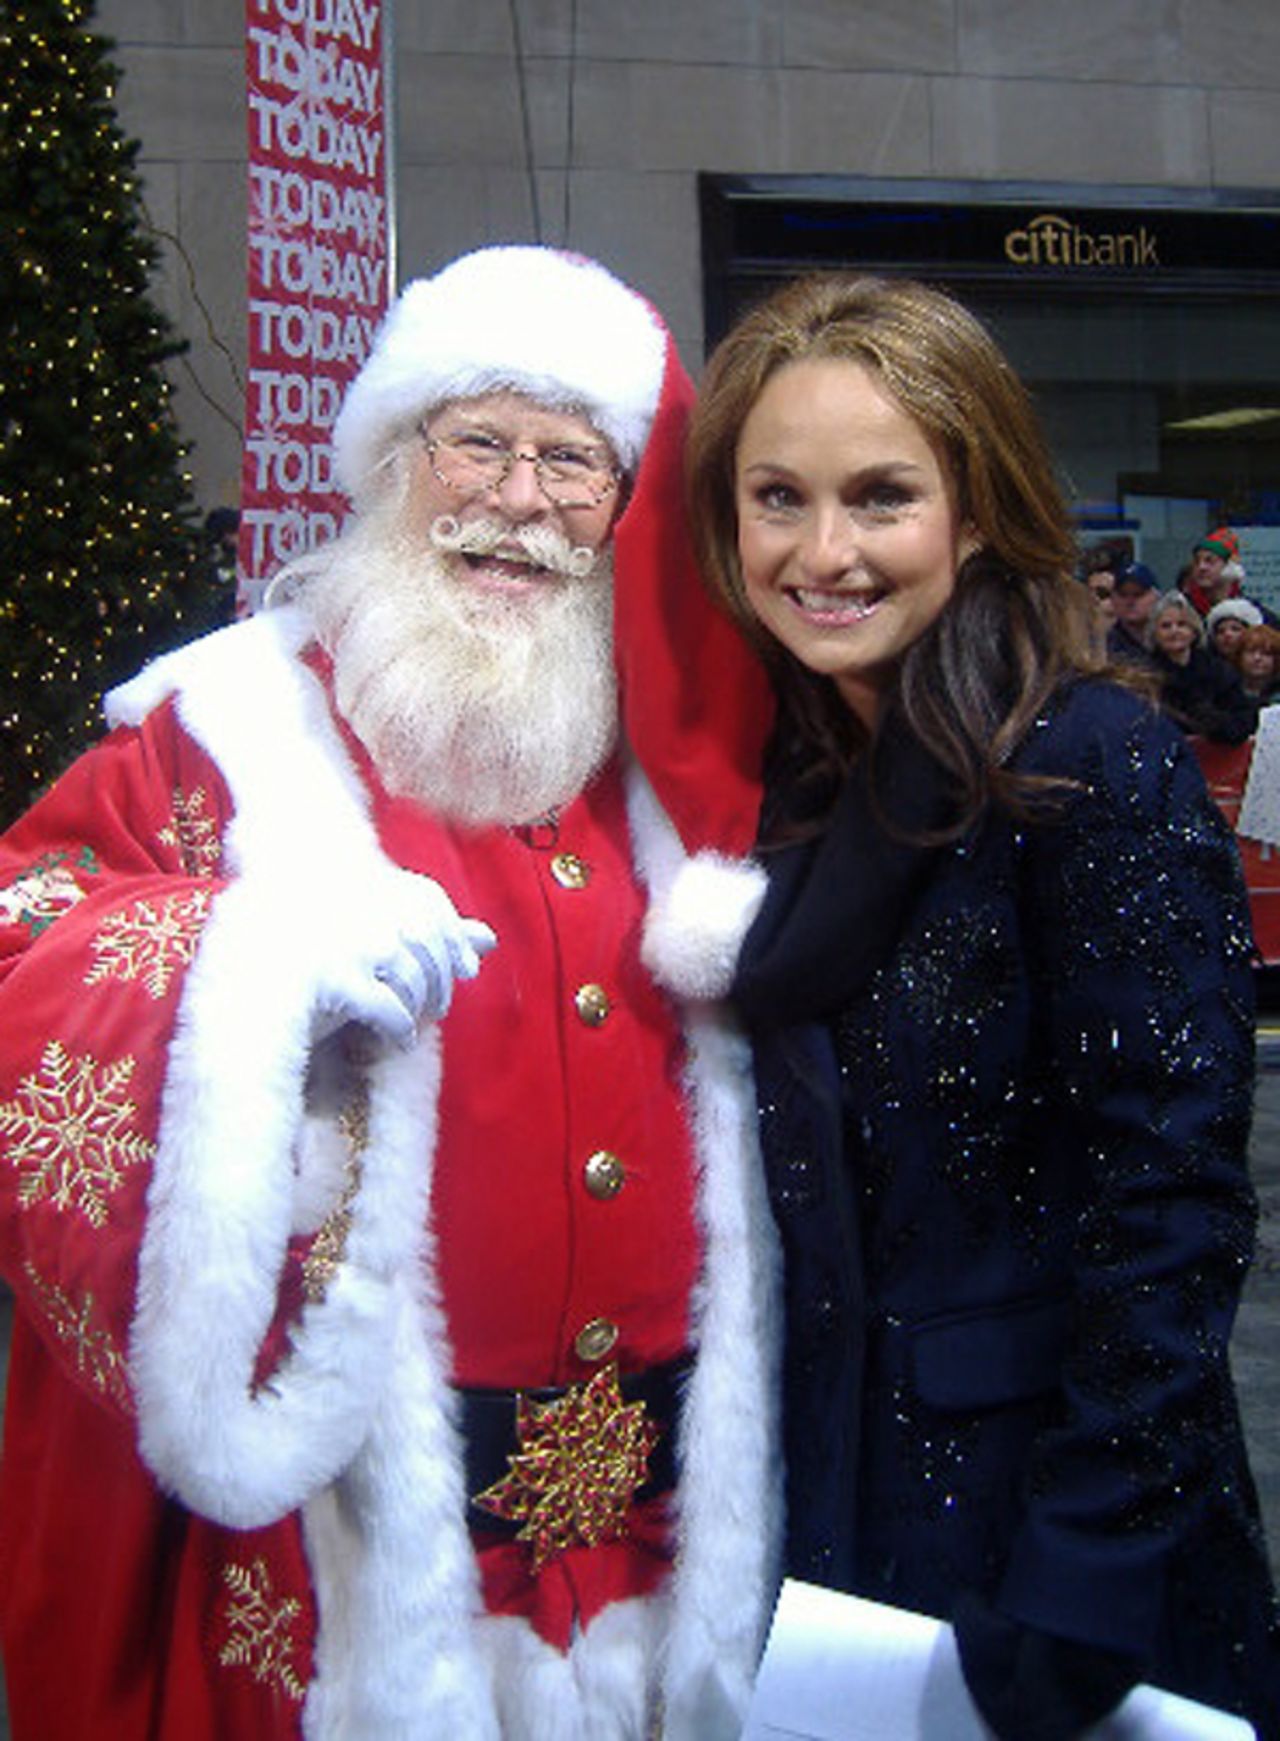 Tim Connaghan, seen here with chef and TV personality Giada De Laurentiis, is in the business of selling Santa. Not only is he out there, he's booking gigs for up to 2,000 others. 